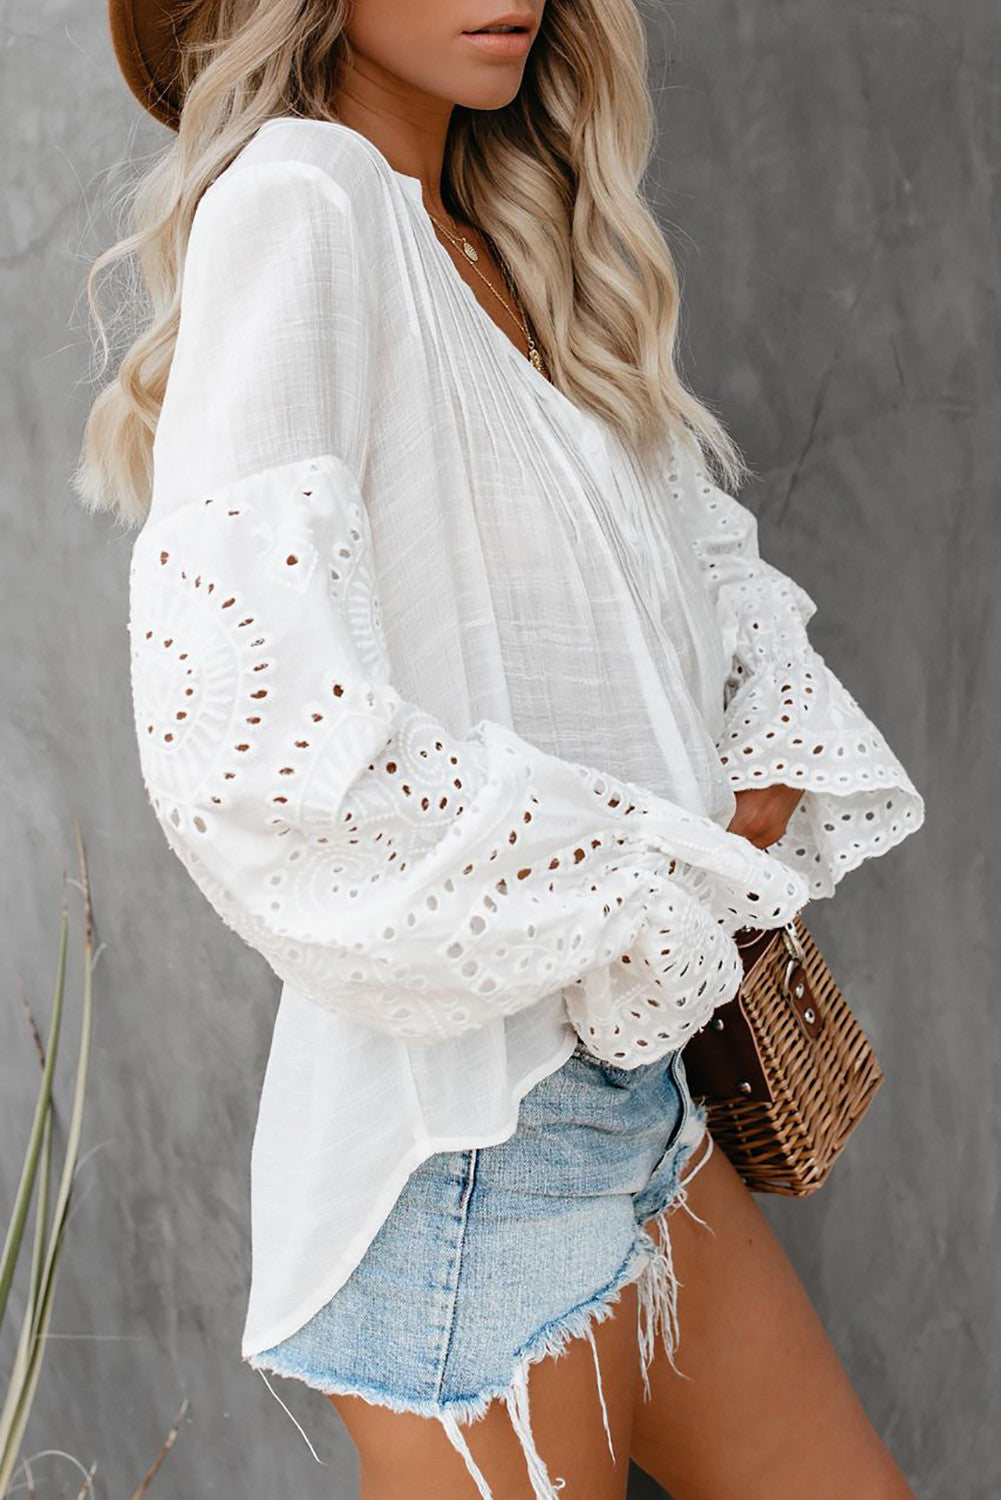 Rekindle Eyelet Button Up Top